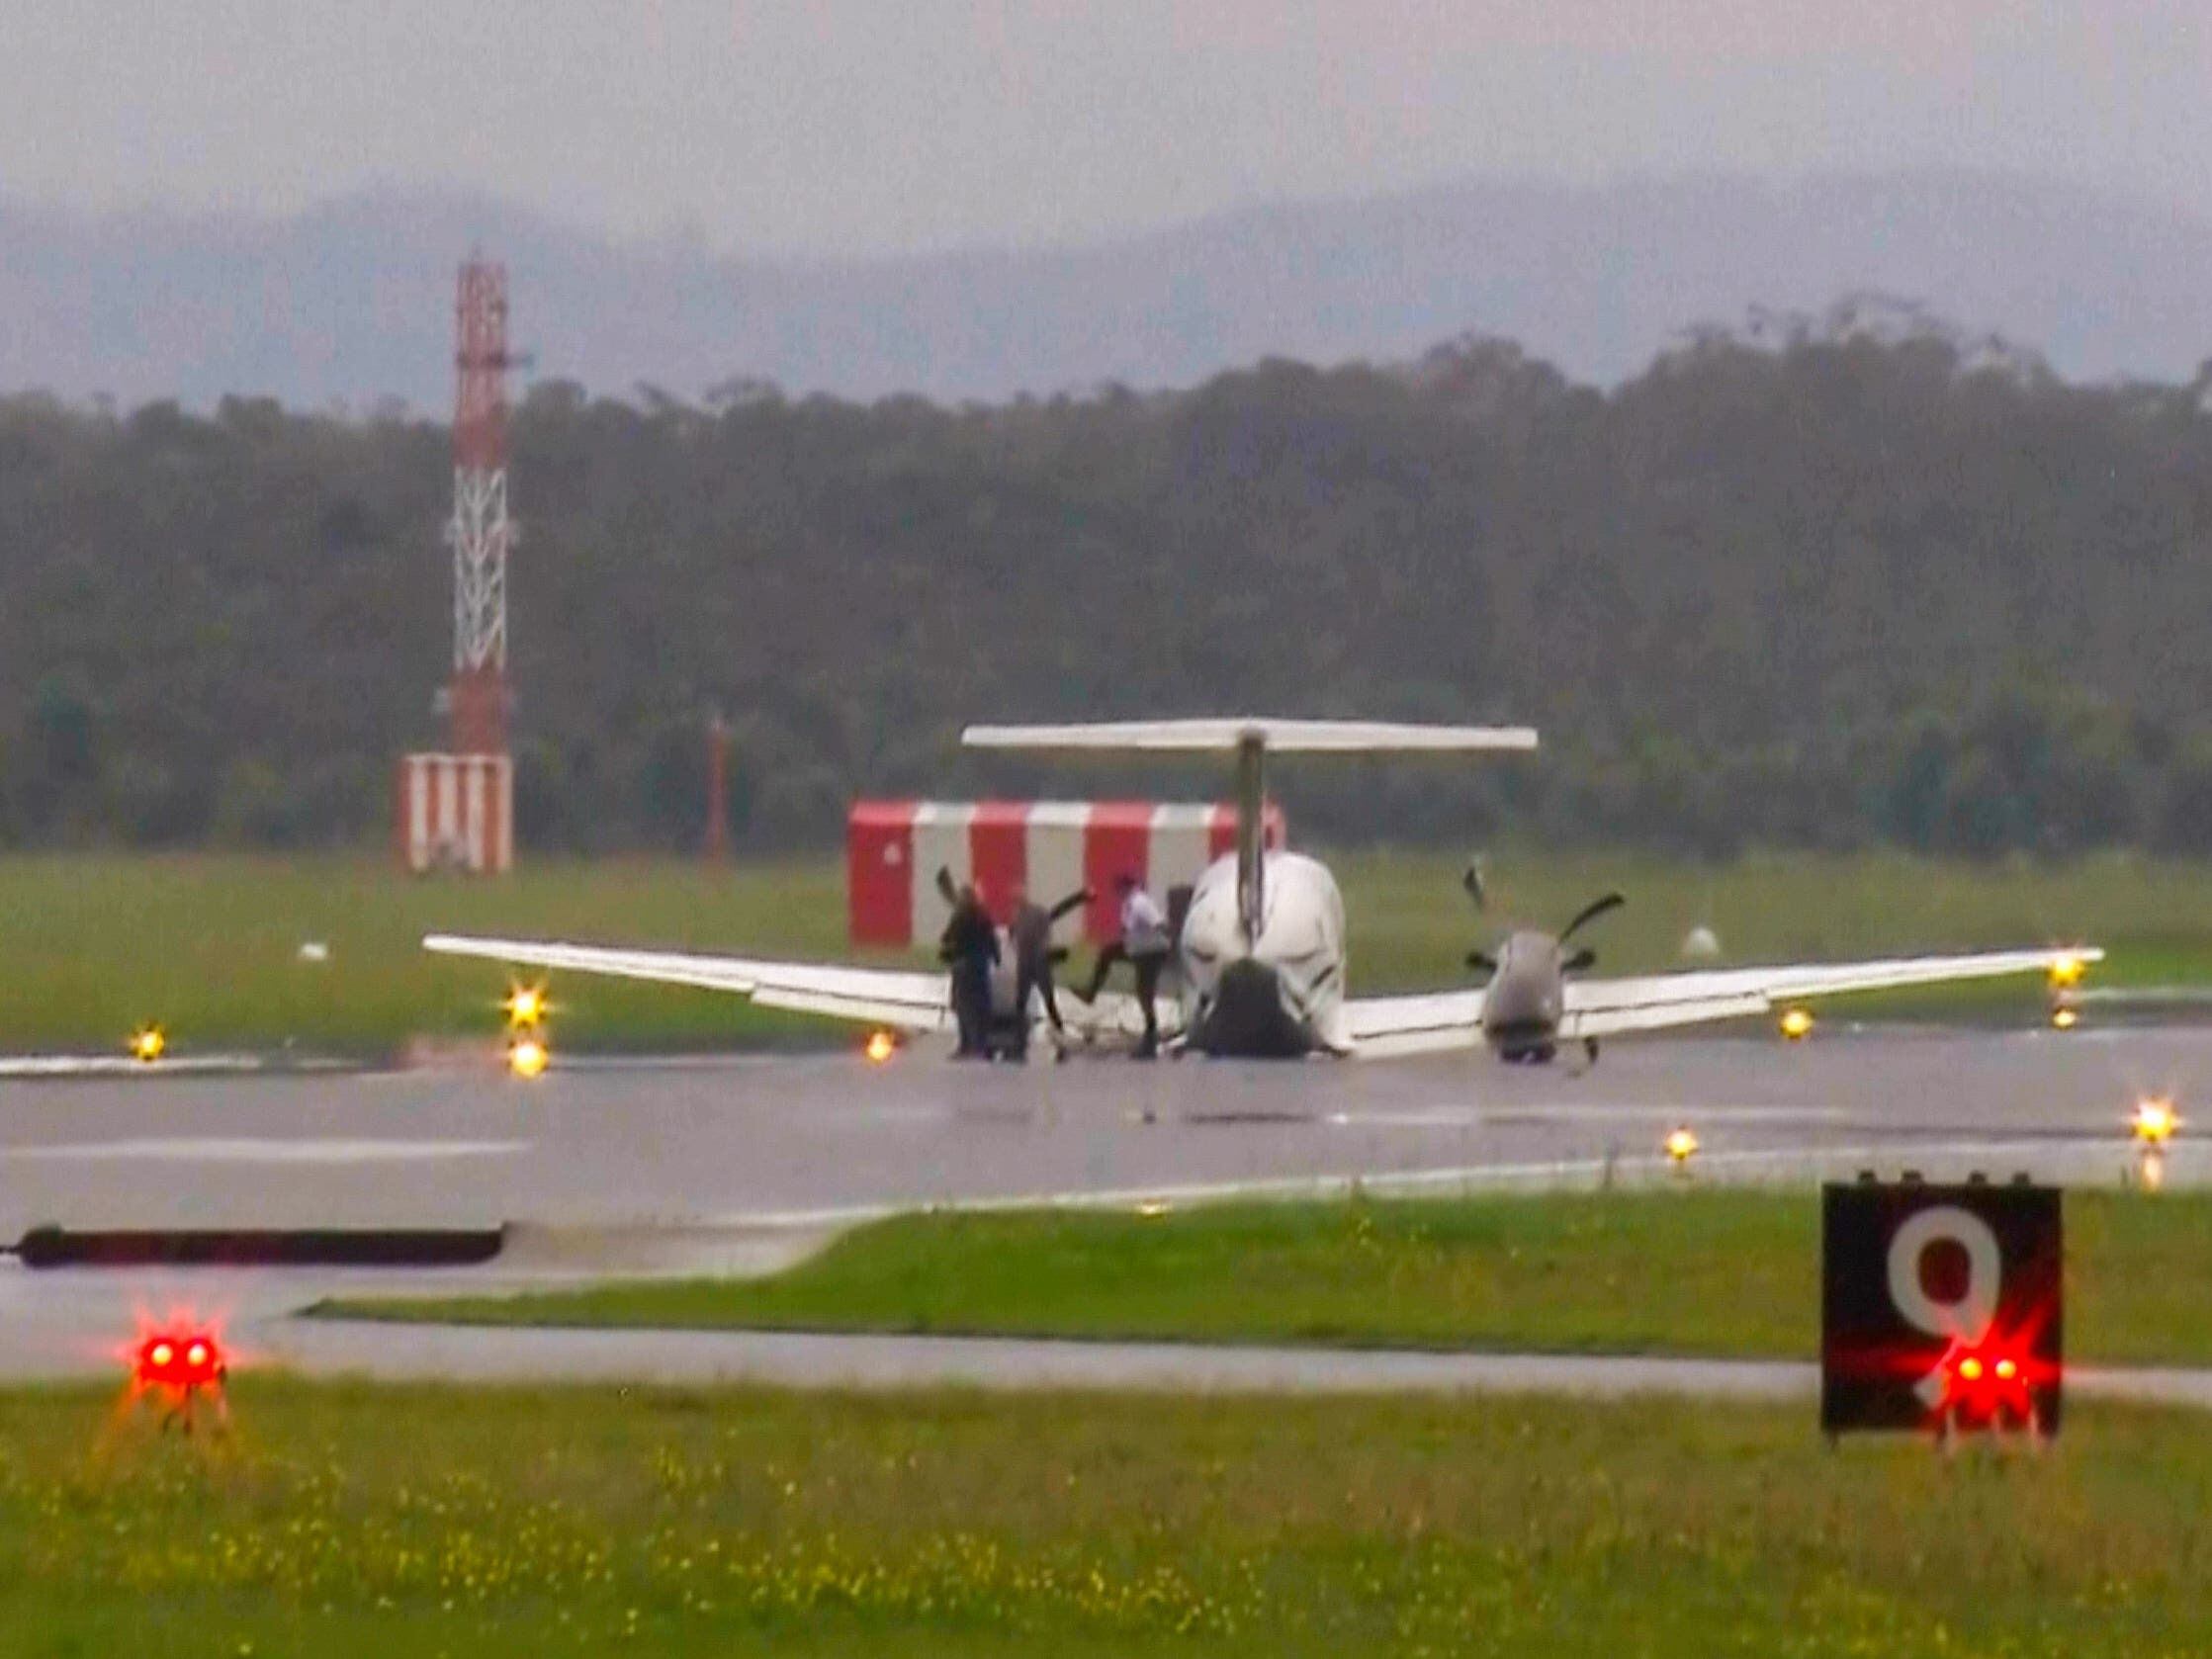 Plane touches down safely without landing gear